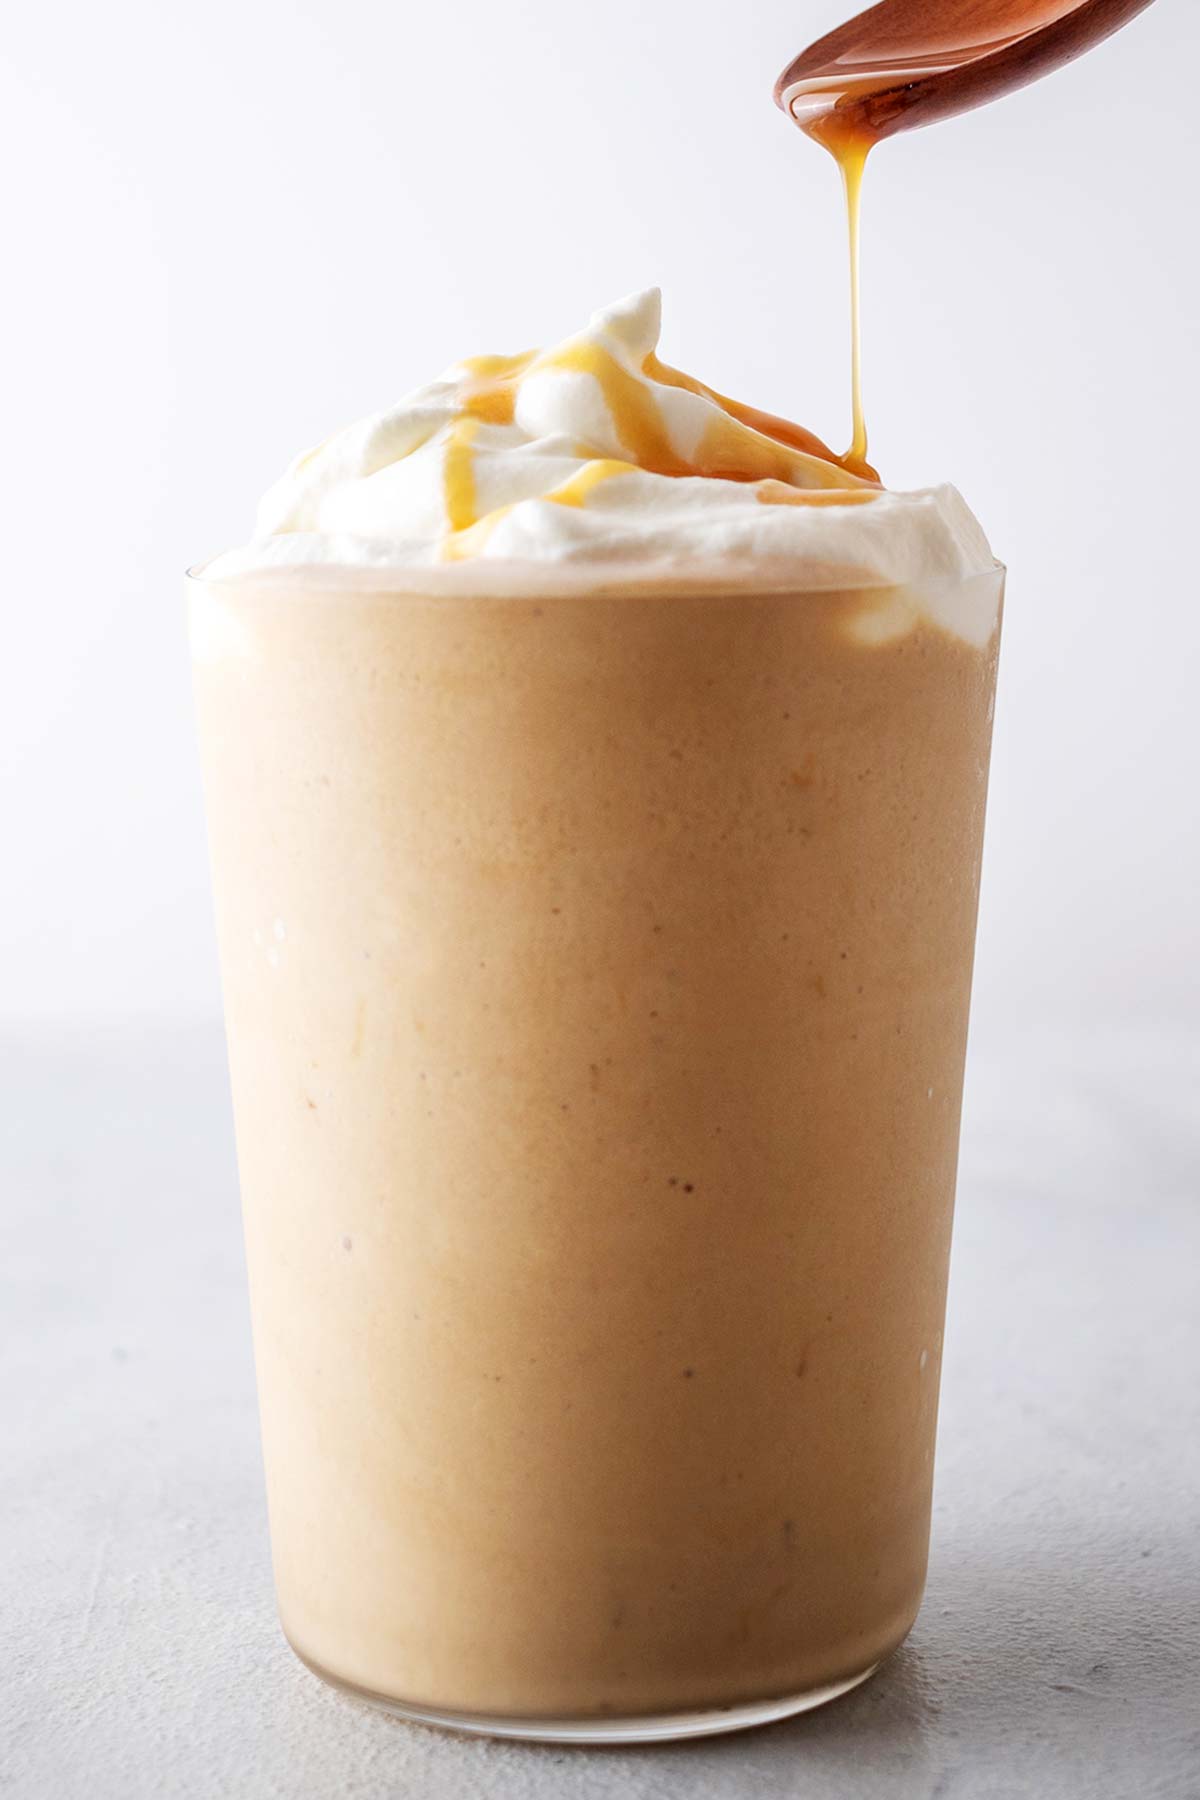 Drizzling caramel sauce on a Caramel Frappuccino with whipped cream.